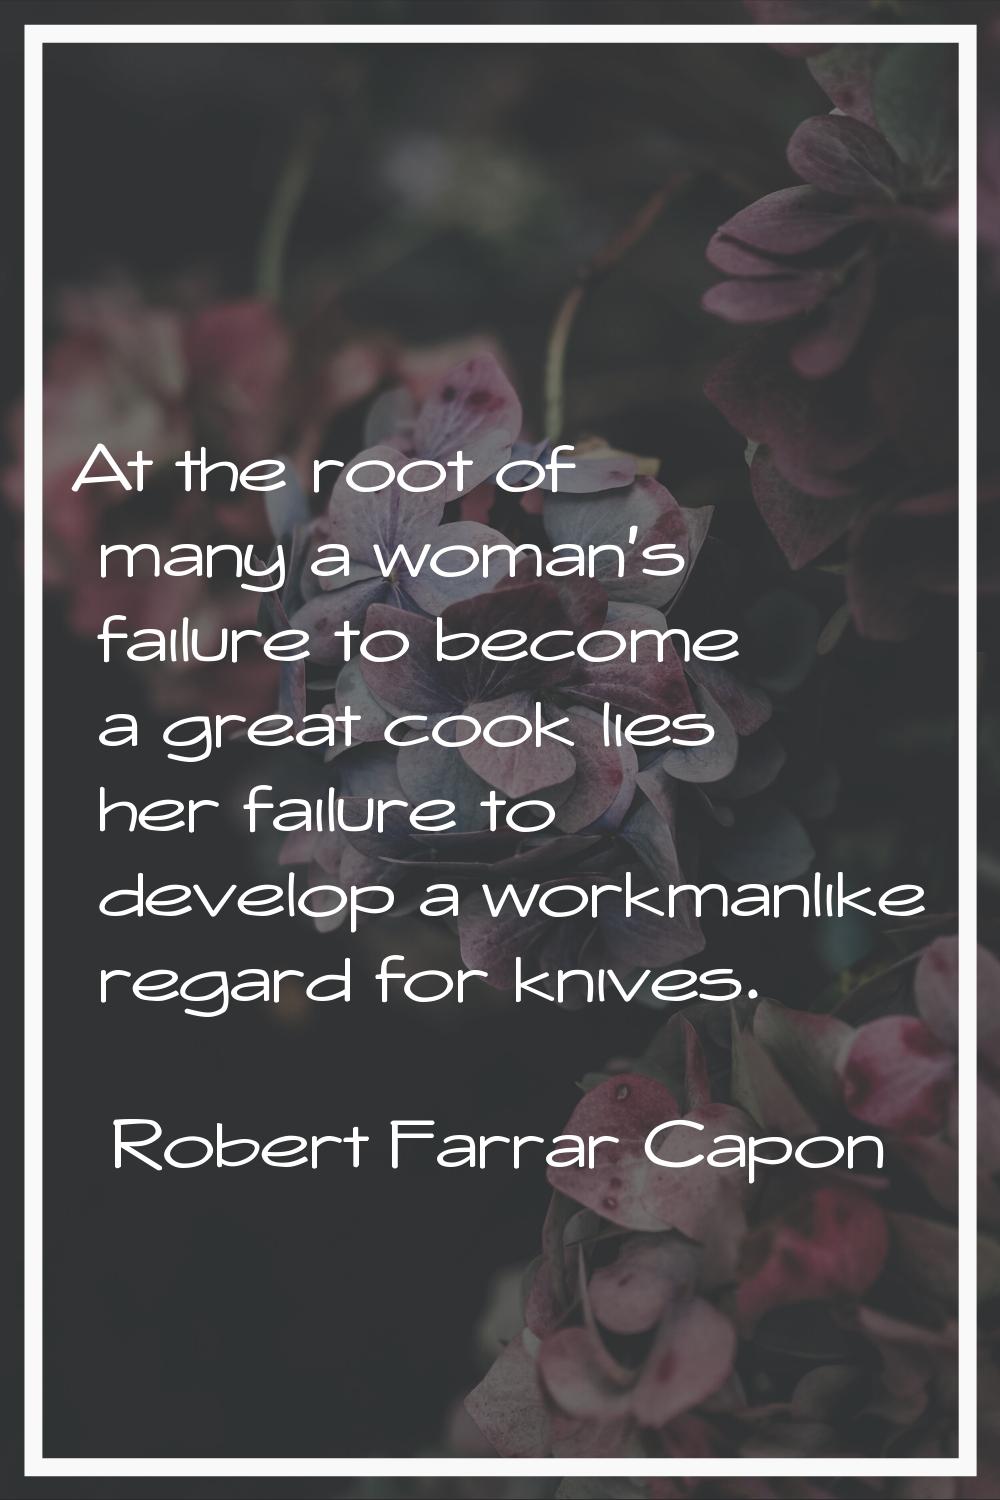 At the root of many a woman's failure to become a great cook lies her failure to develop a workmanl